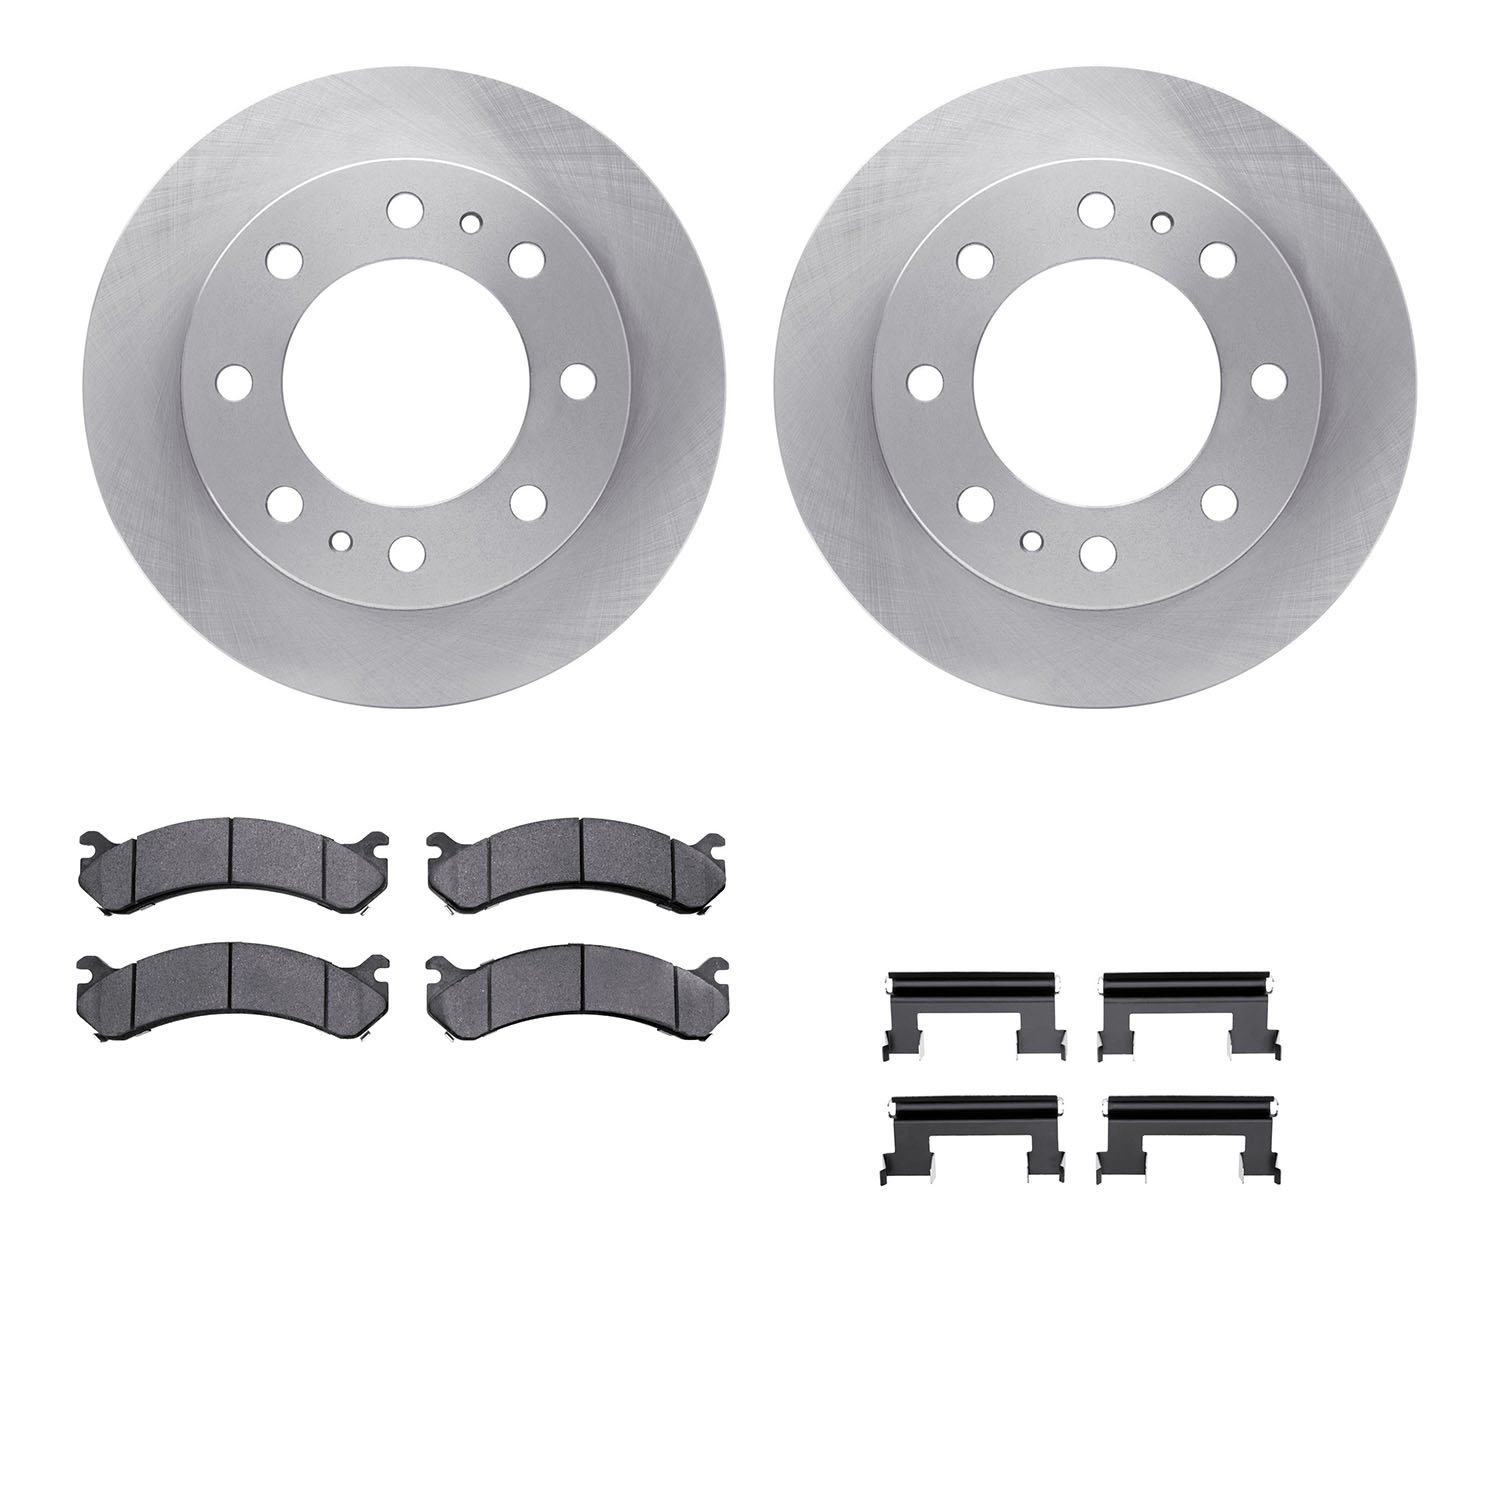 6412-48109 Brake Rotors with Ultimate-Duty Brake Pads Kit & Hardware, 2001-2020 GM, Position: Front